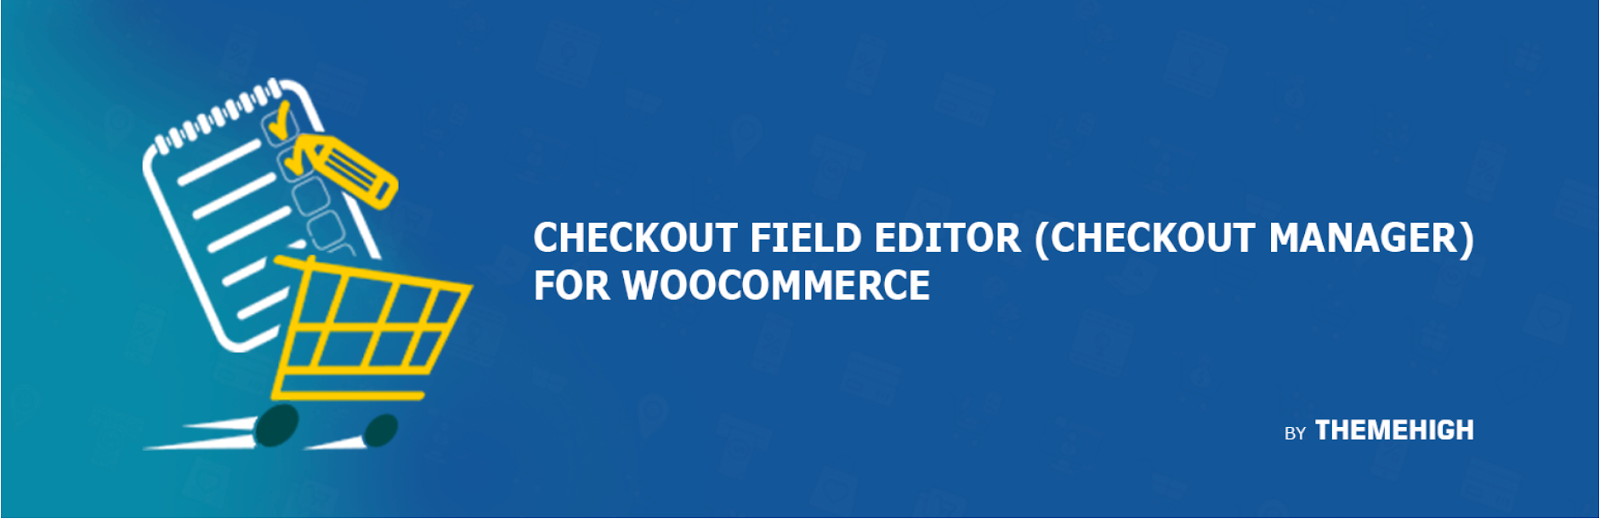 17. Checkout Field Editor for WooCommerce